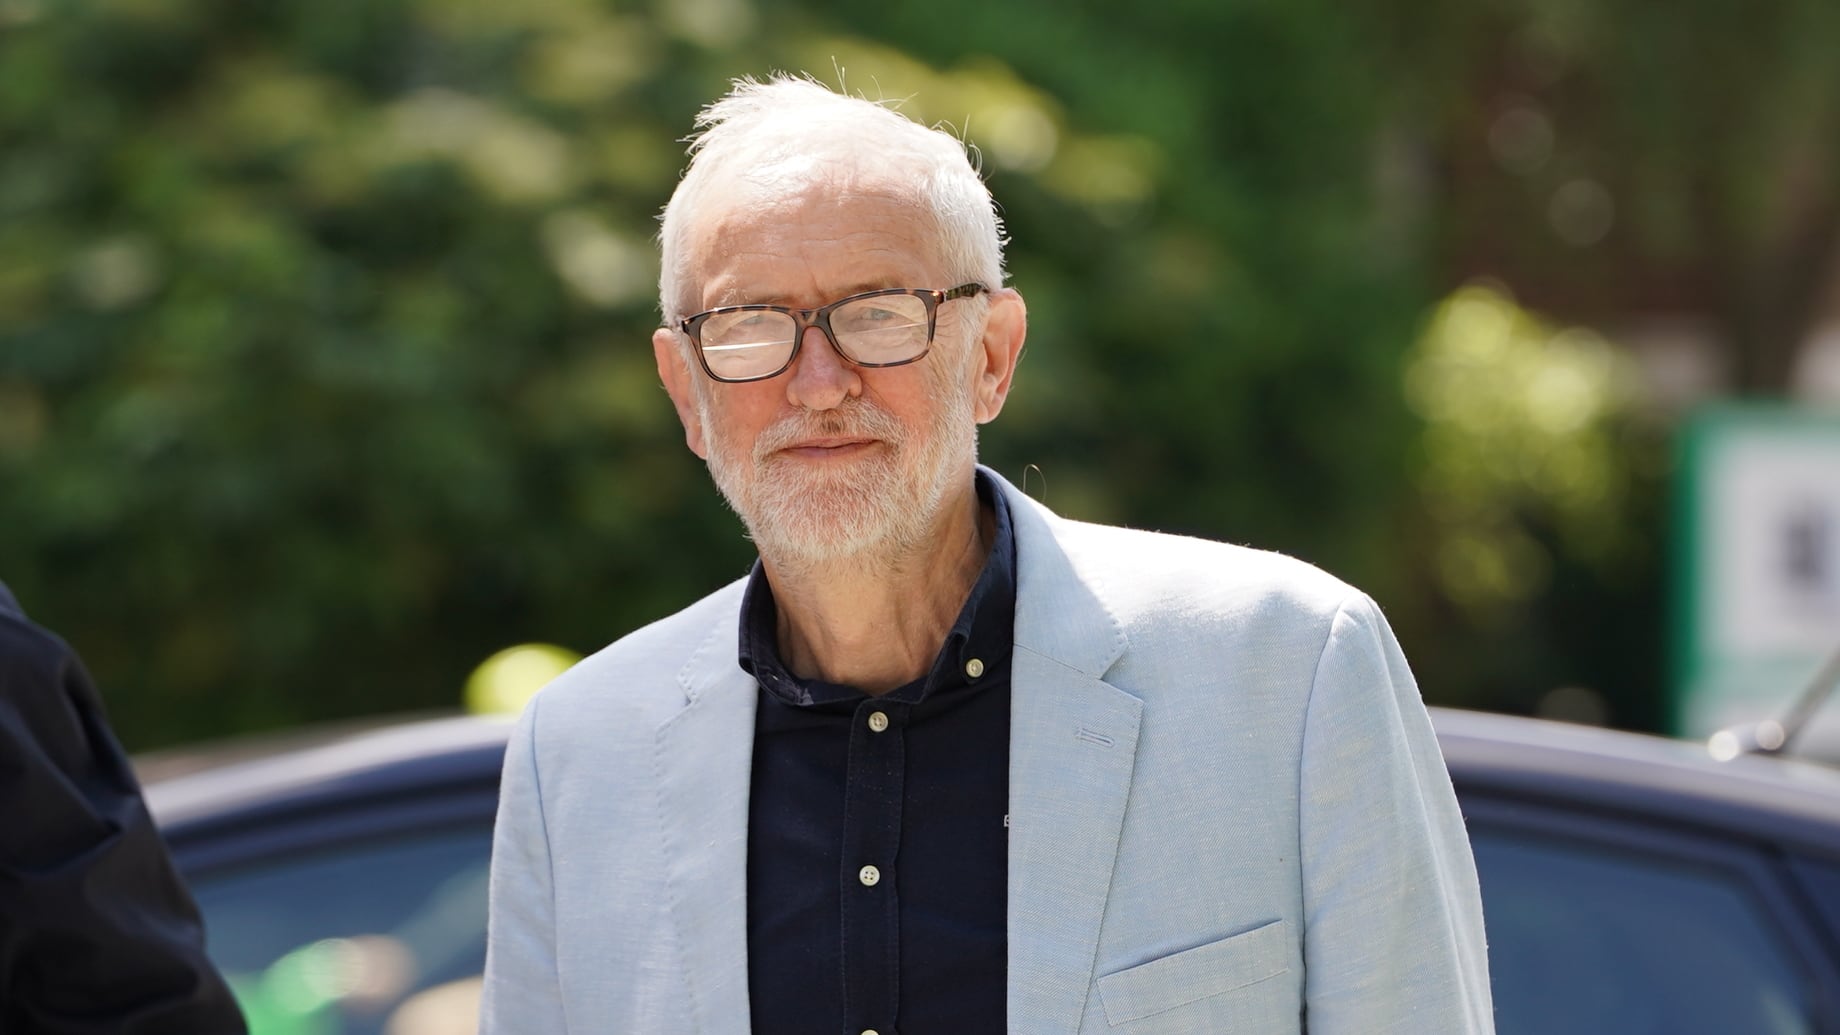 Former Labour Party leader Jeremy Corbyn has retained his seat as an independent